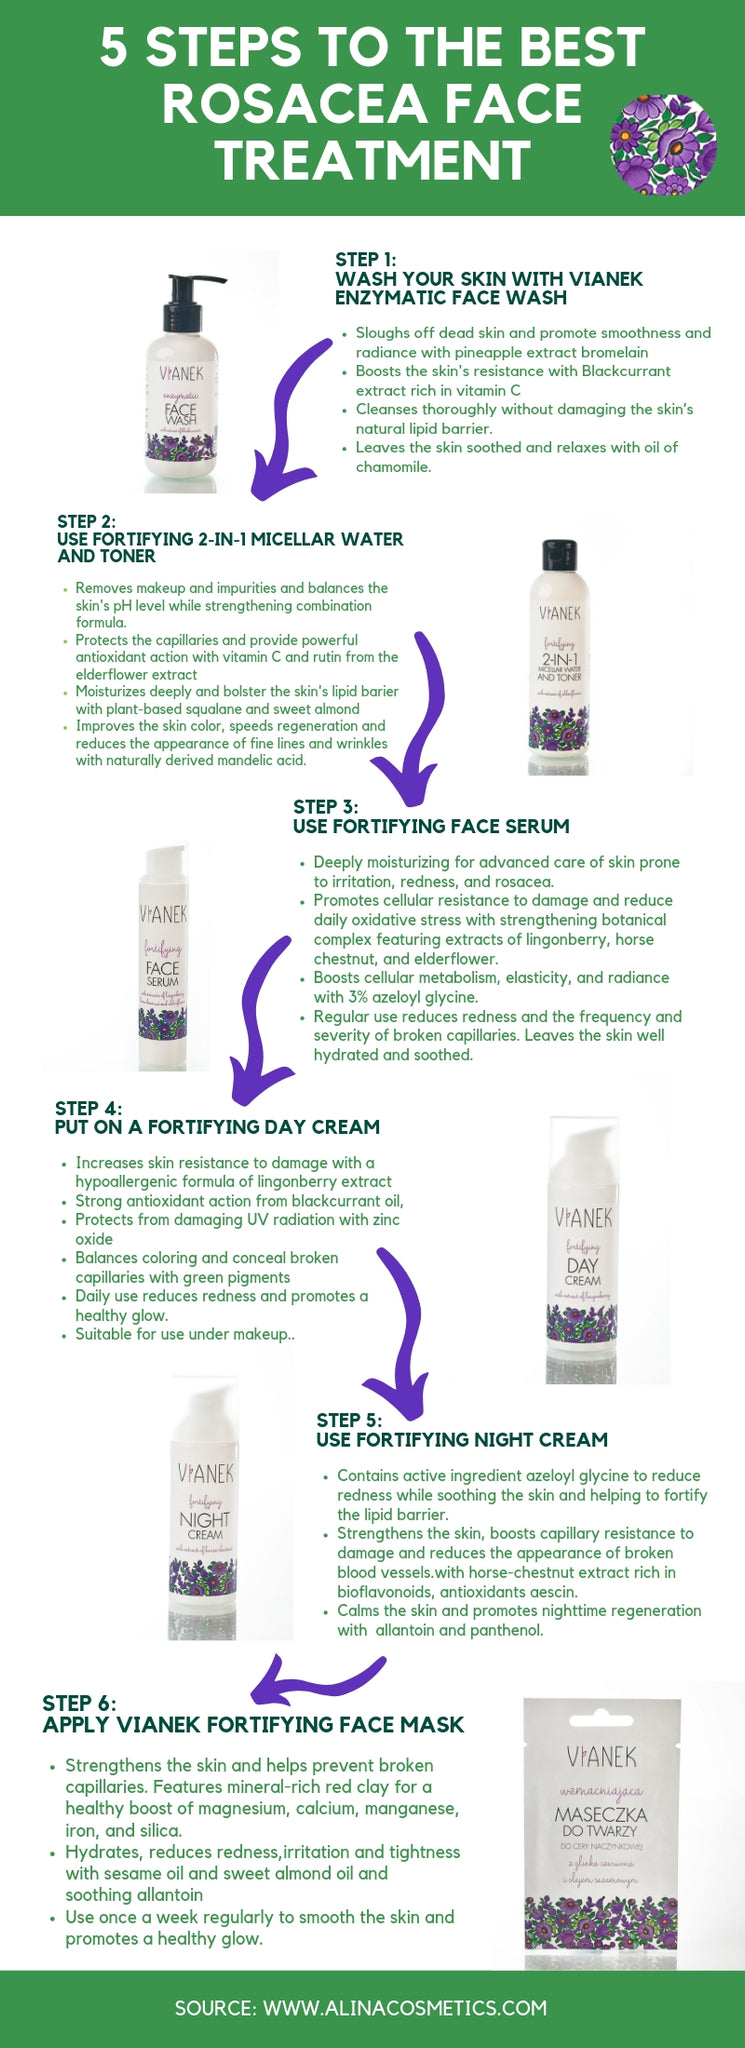 5 STEP THE BEST ROSACEA FACE TREATMENT infographic